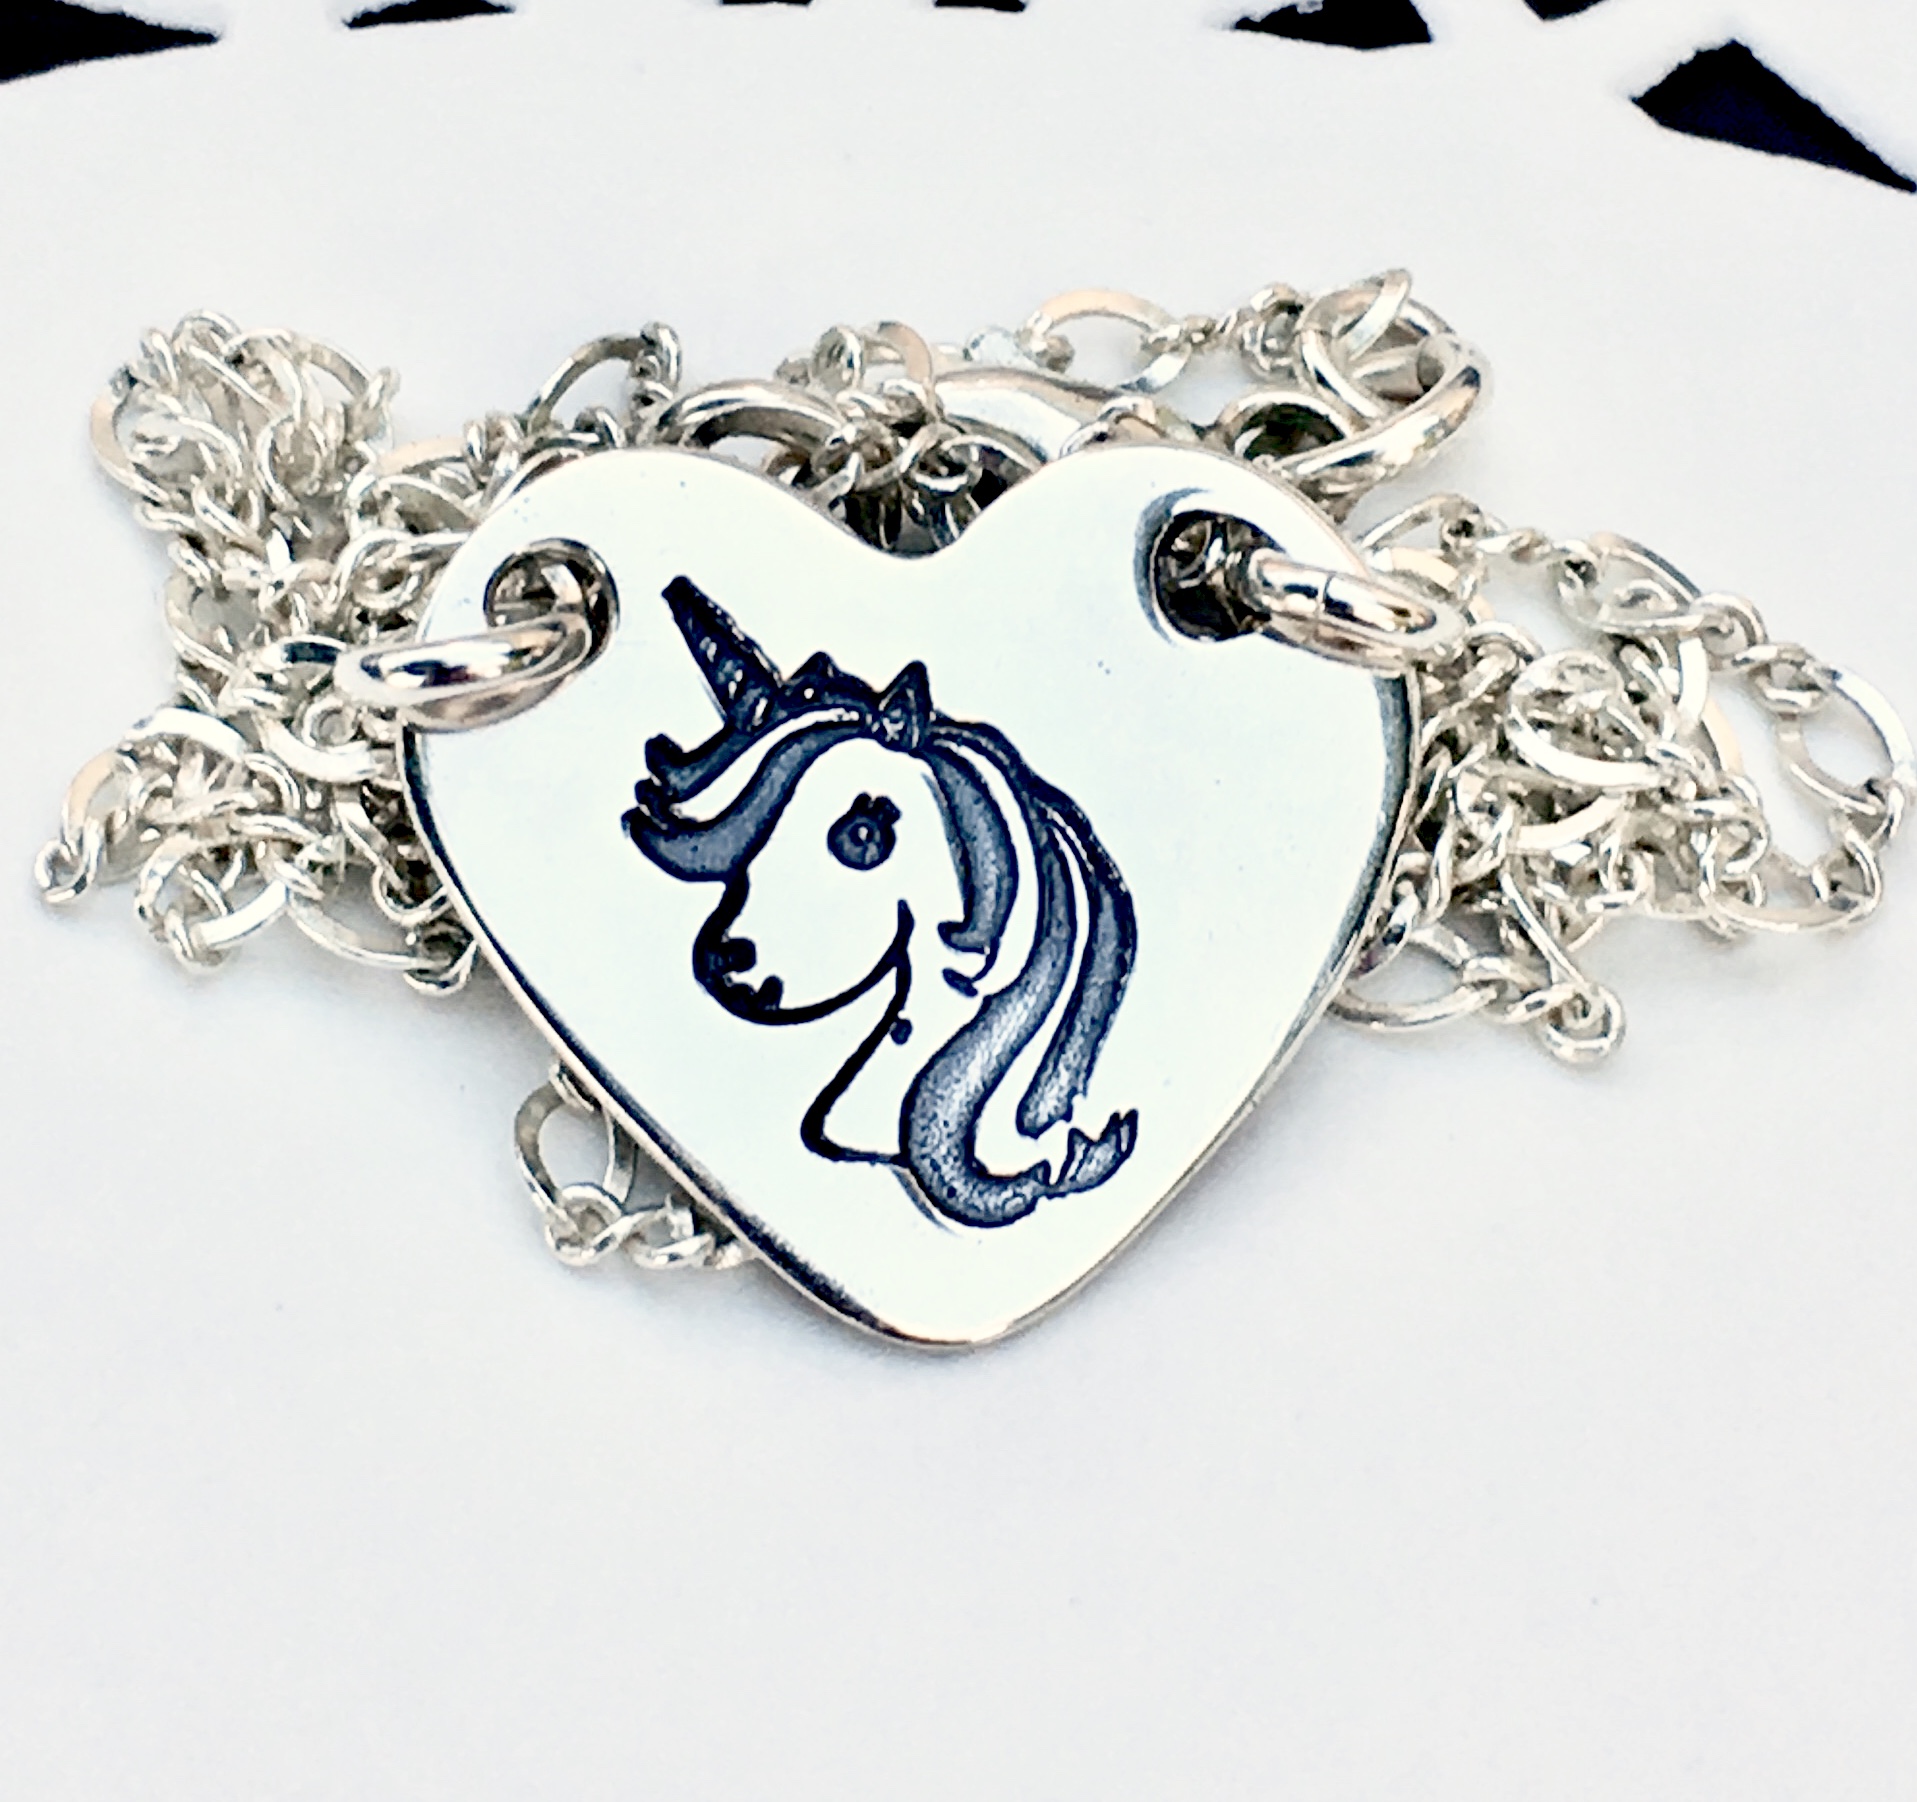 LINSION 925 Sterling Silver Neck Moveable Unicorn Pendant Charms Animal  Pendant TA286